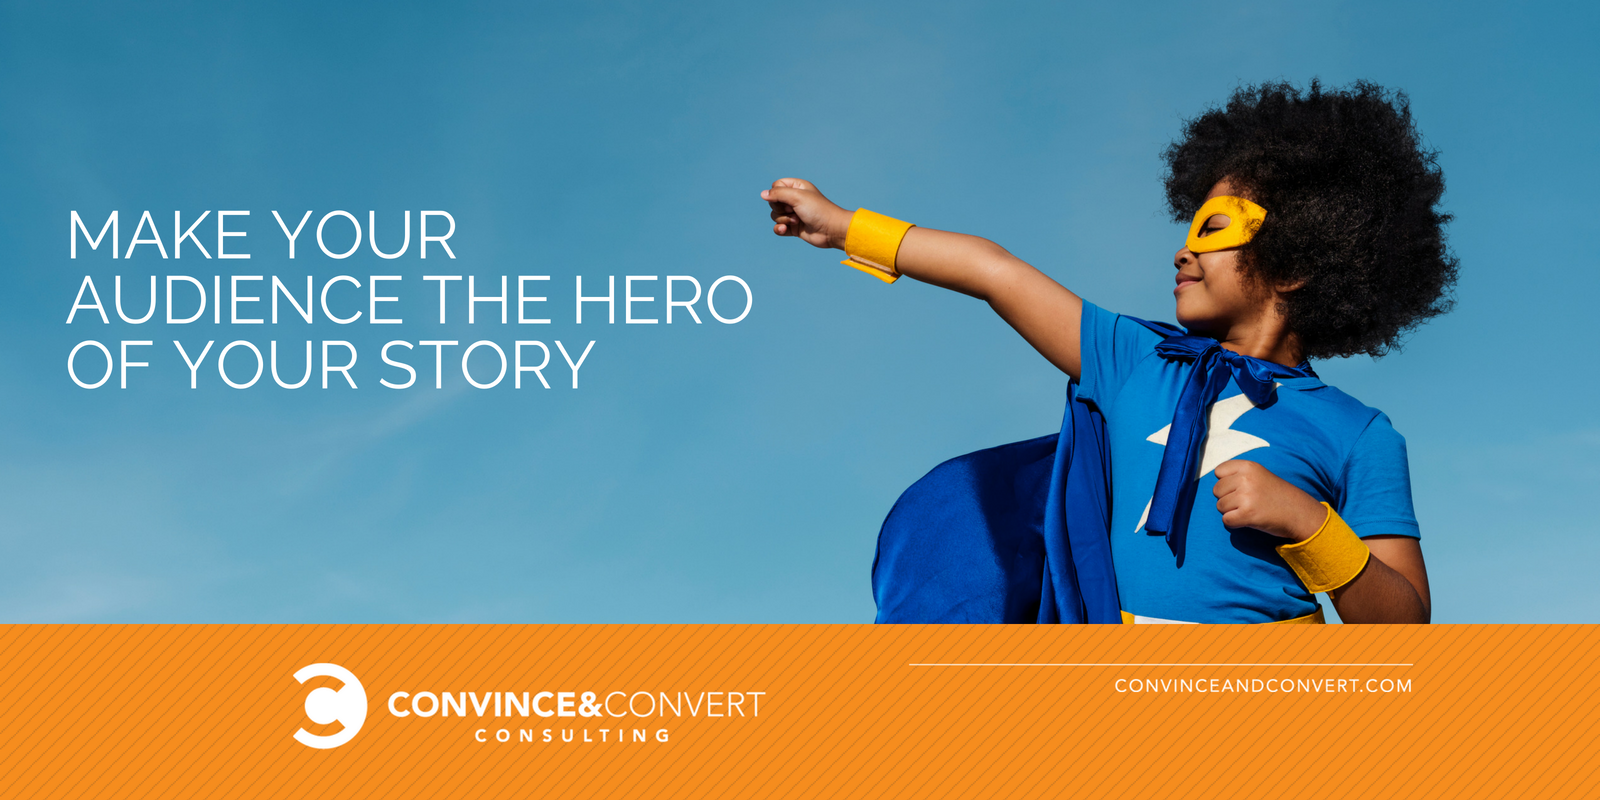 Make your audience the hero of your story